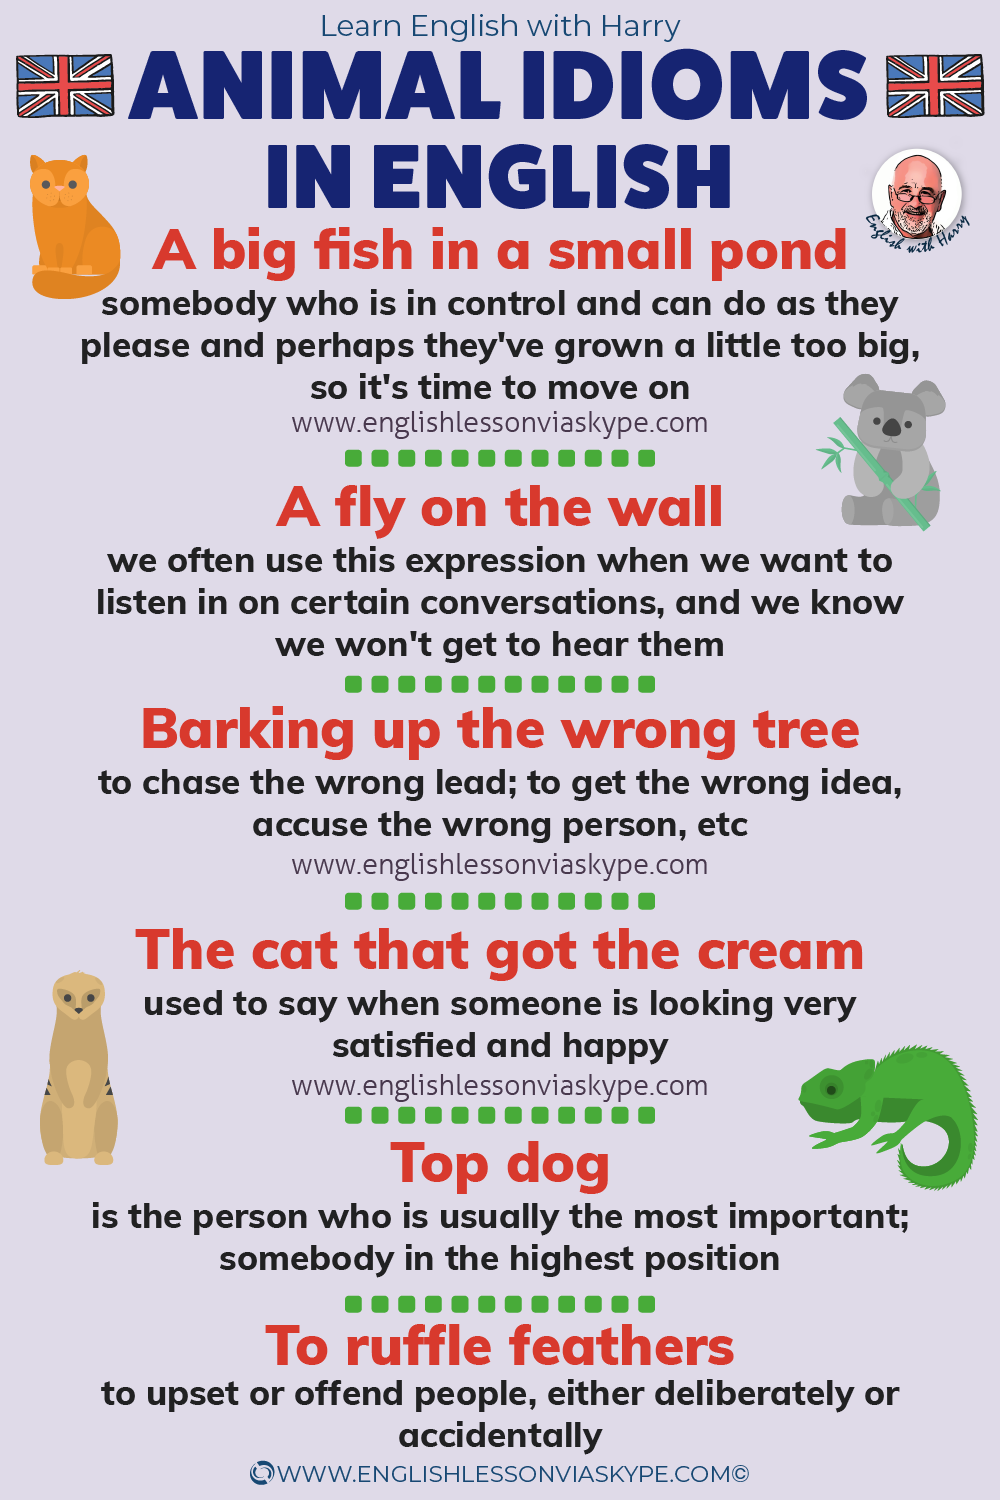 Learn unusual animal idioms in English. Improve English speaking. Advanced English learning. Online English lessons at www.englishlessonviaskype.com #learnenglish